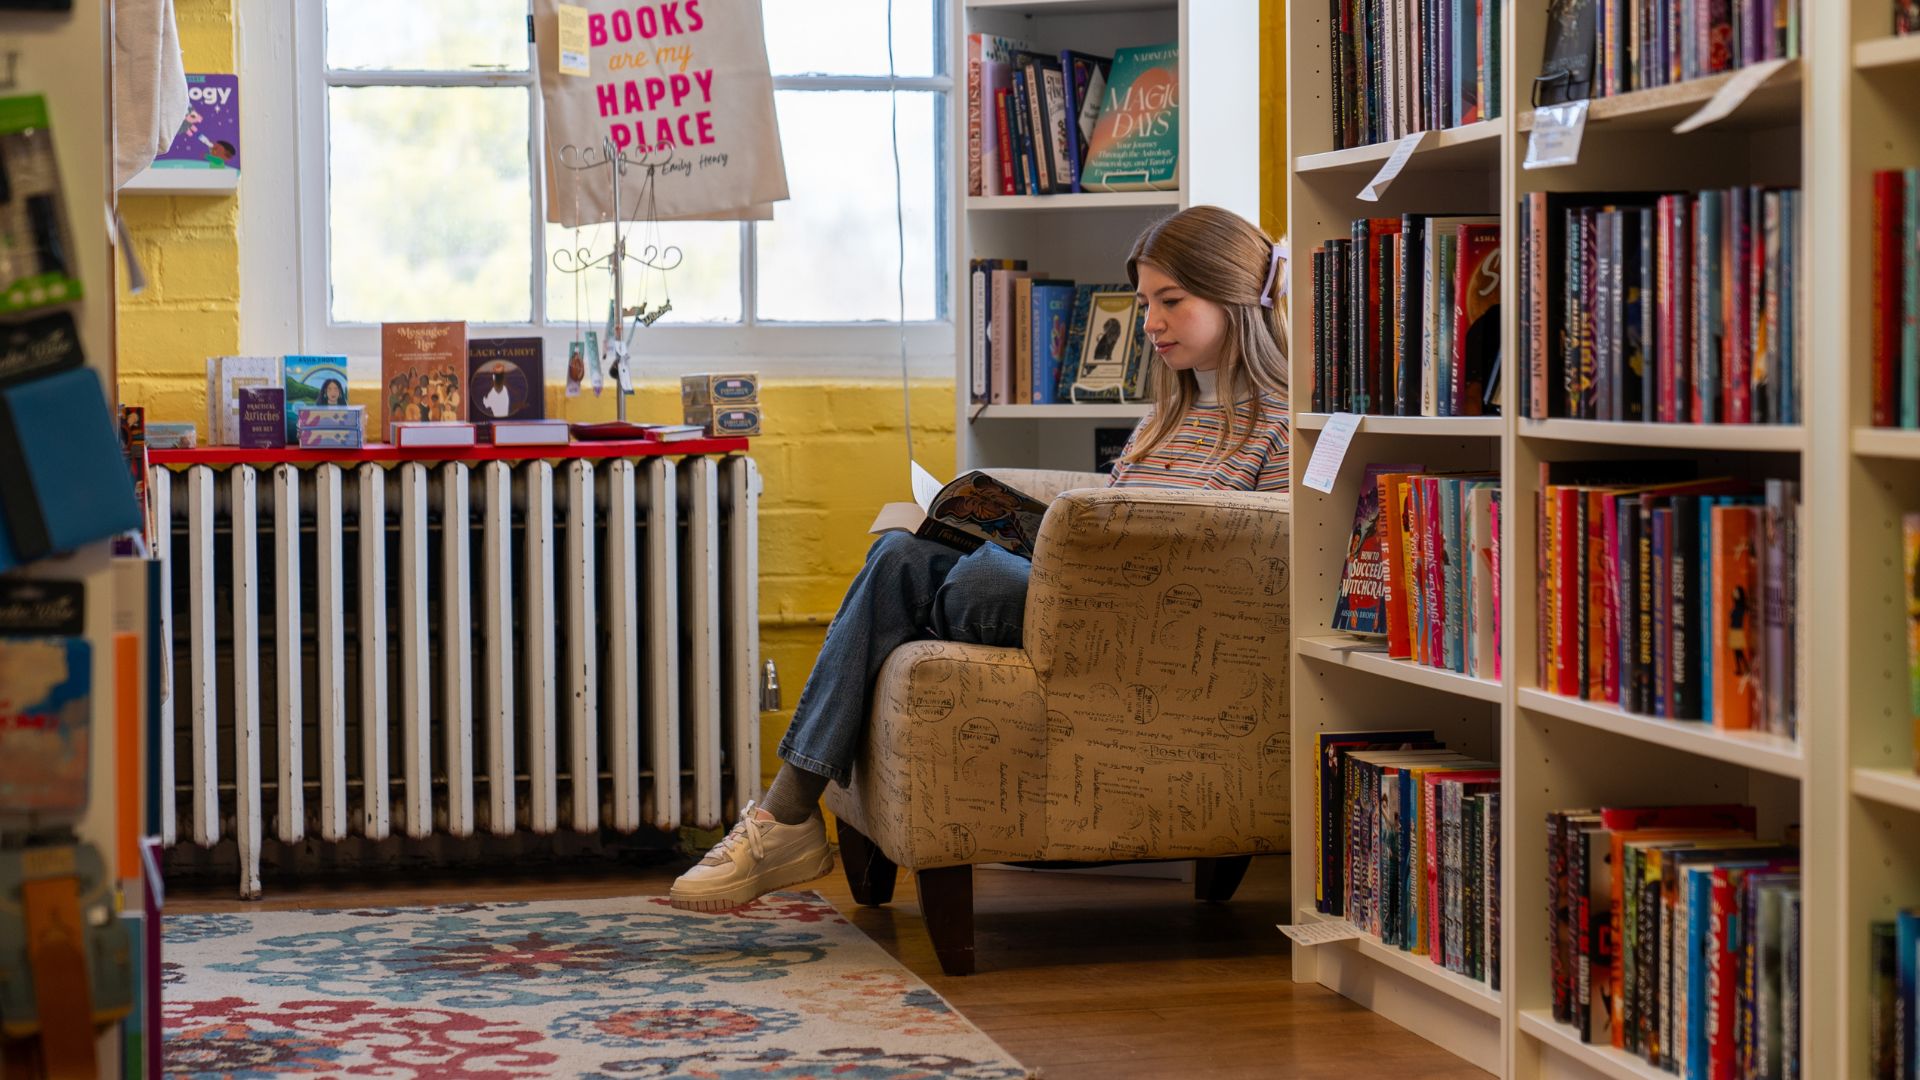 A young woman reads in a corner of a bookstore.